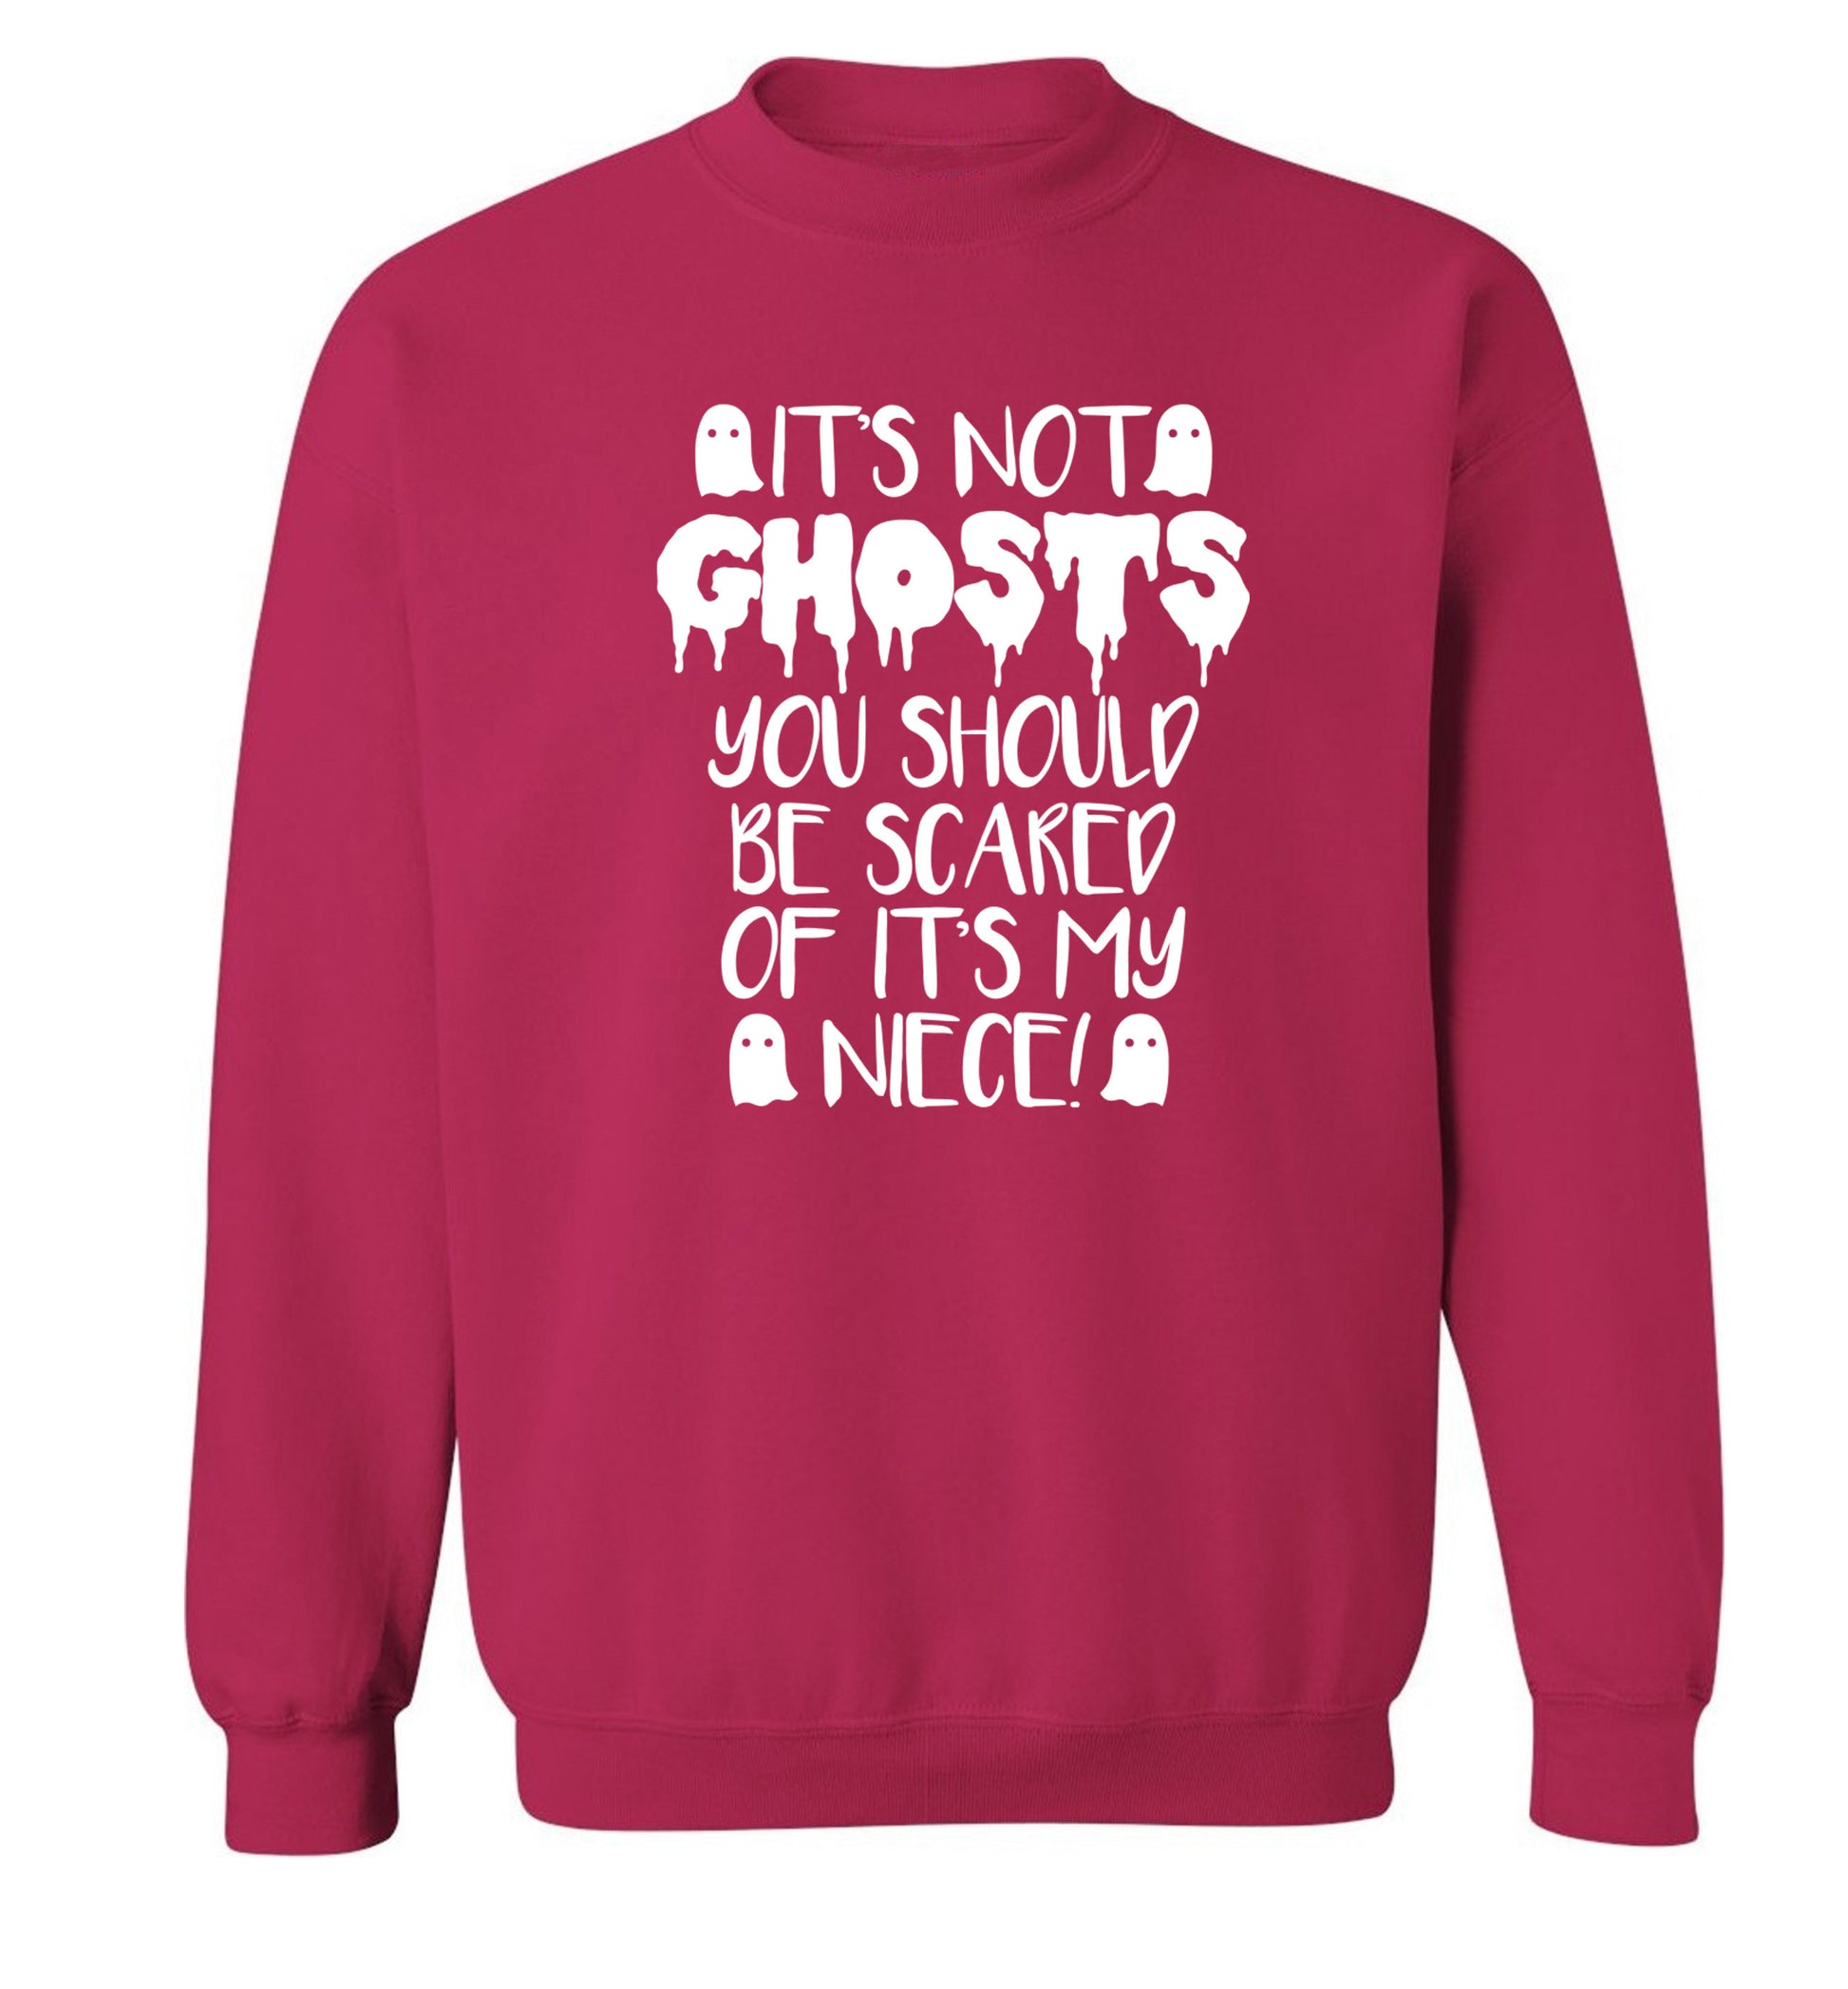 It's not ghosts you should be scared of it's my niece! Adult's unisex pink Sweater 2XL